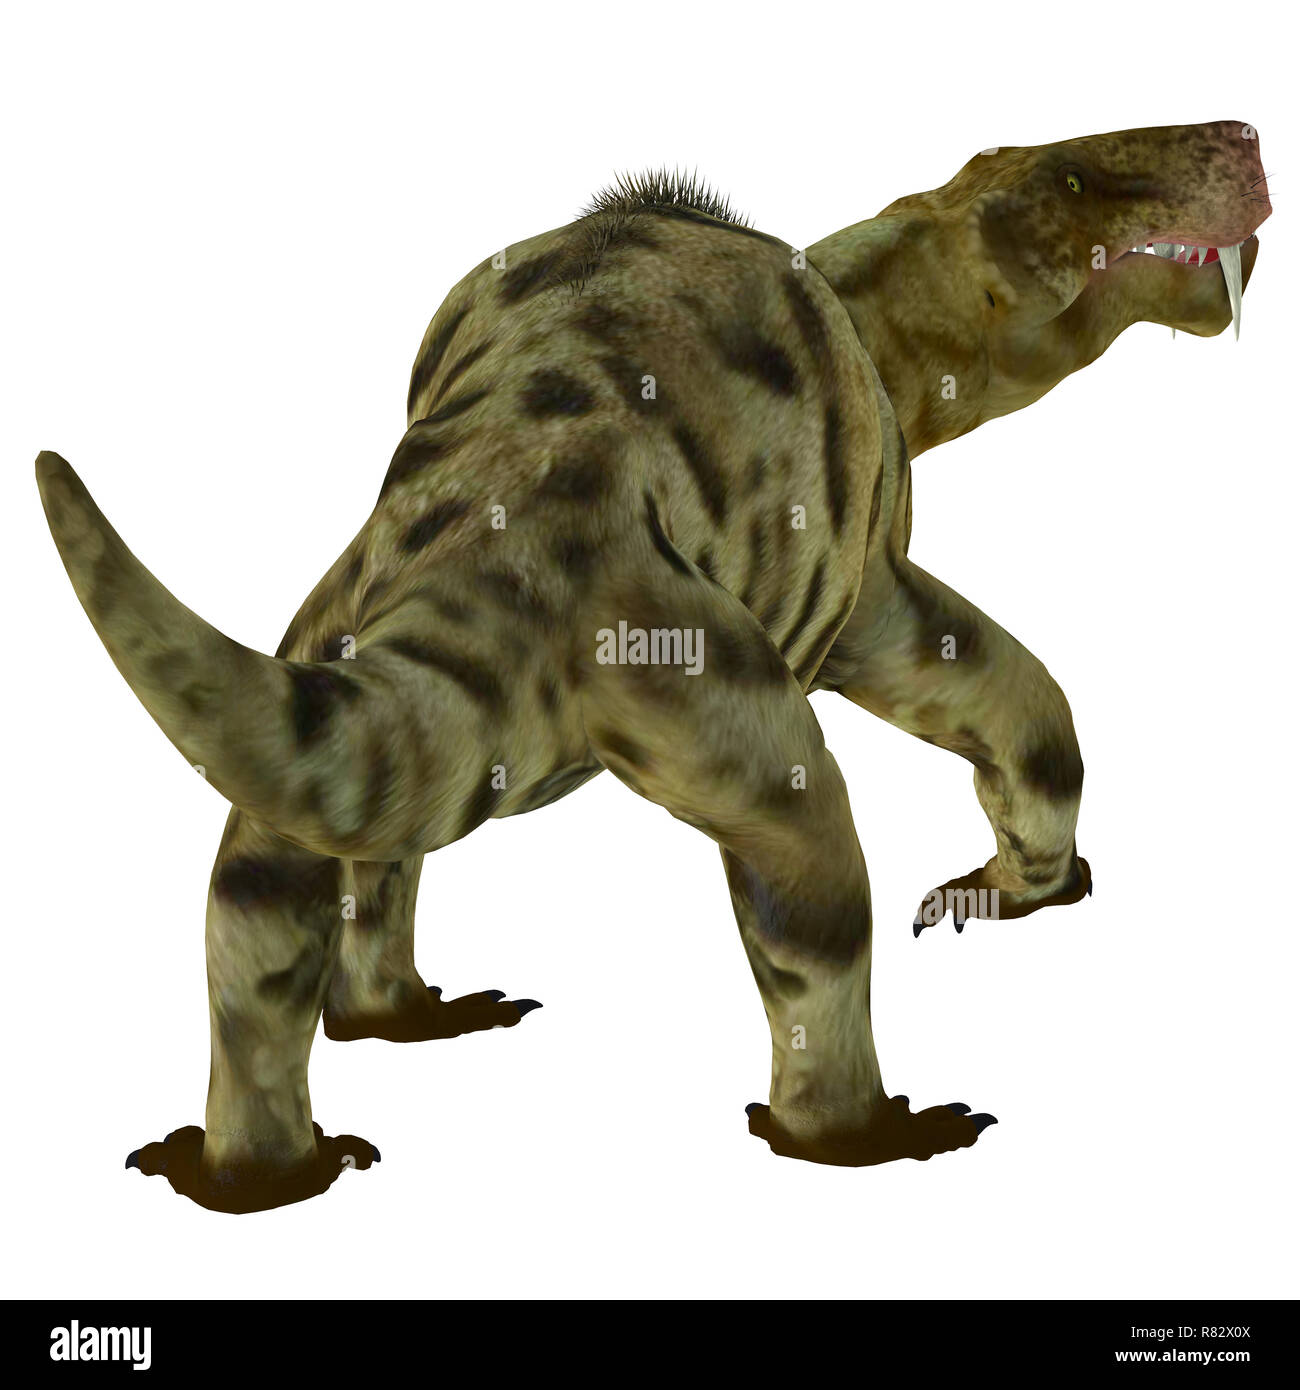 Inostrancevia Dinosaur Tail - Inostrancevia was a carnivorous cat-like dinosaur that lived in Russia during the Permian Period. Stock Photo